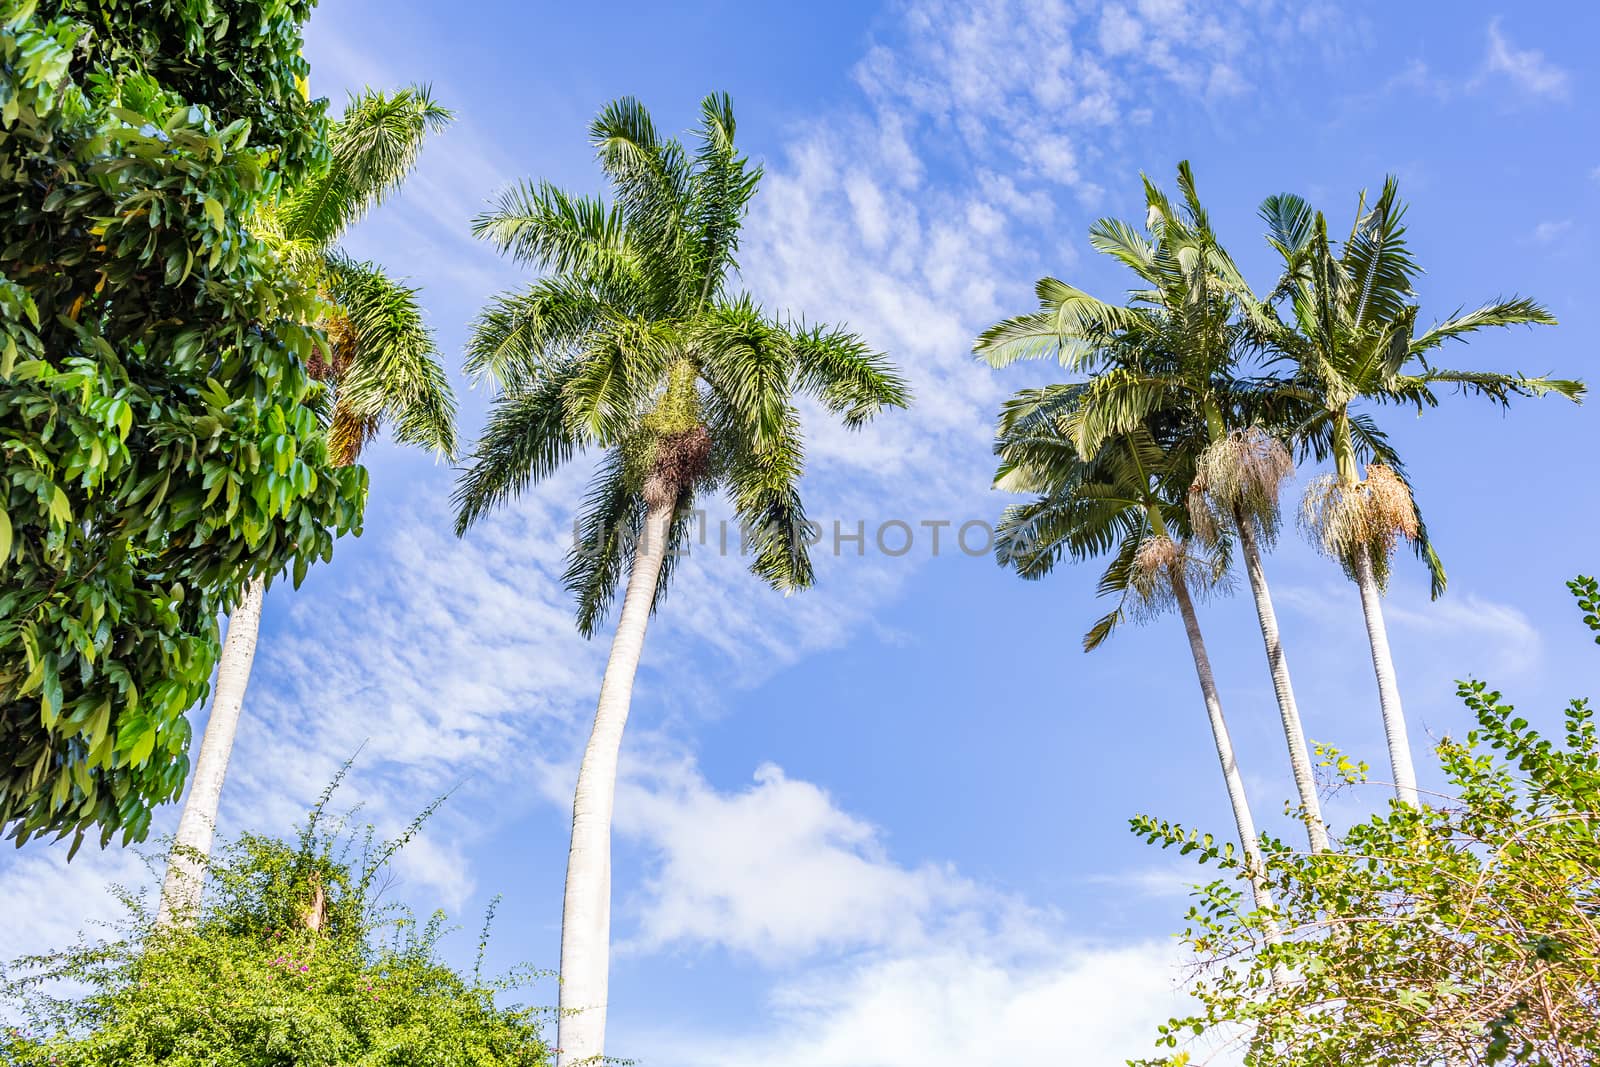 Palm trees tower over other vegetation in south Florida.